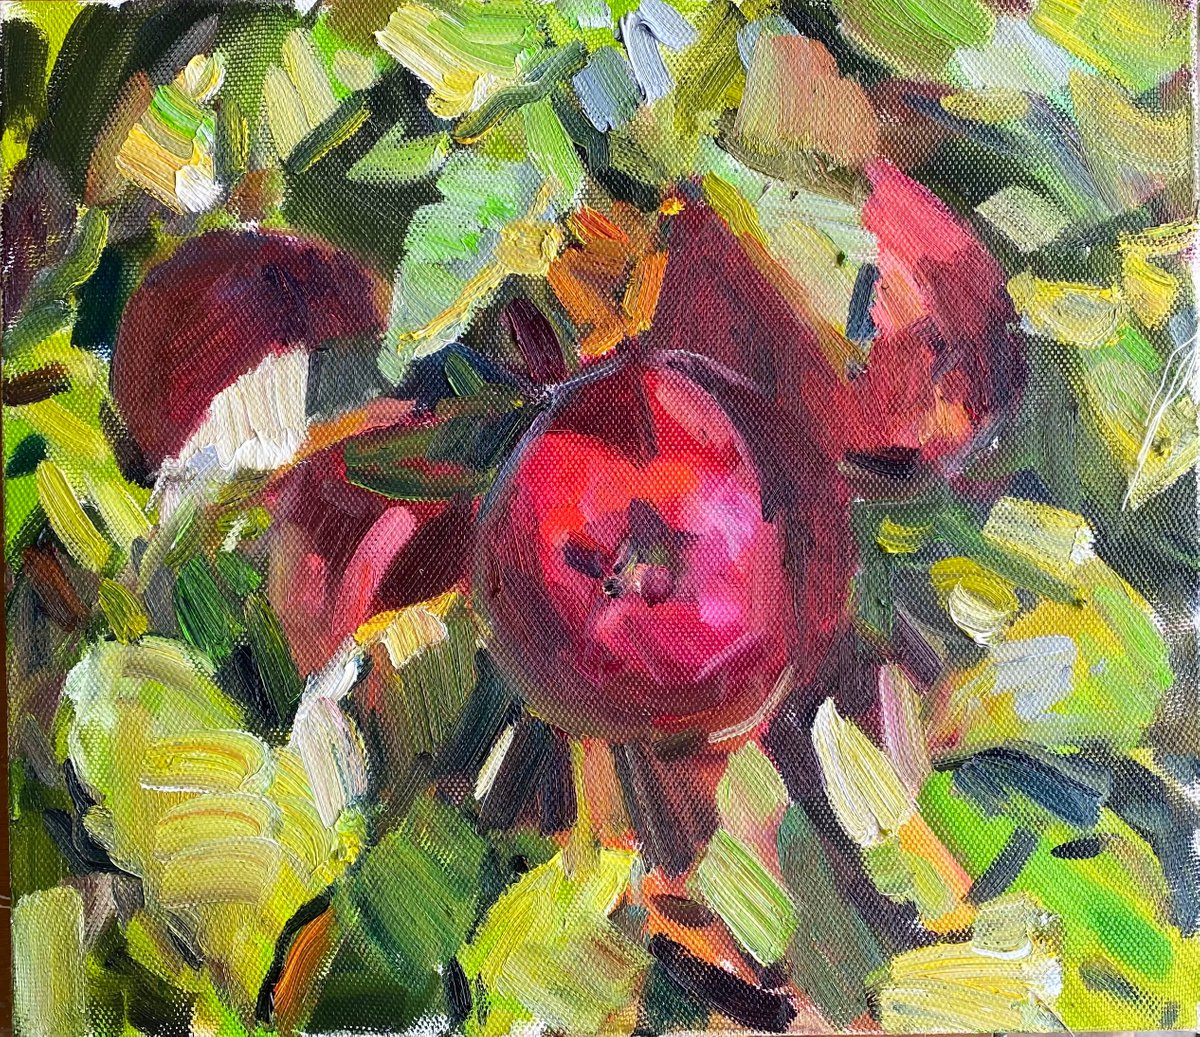 Apples on the branch 35х40 cm| oil painting on canvas flowers by Nataliia Nosyk